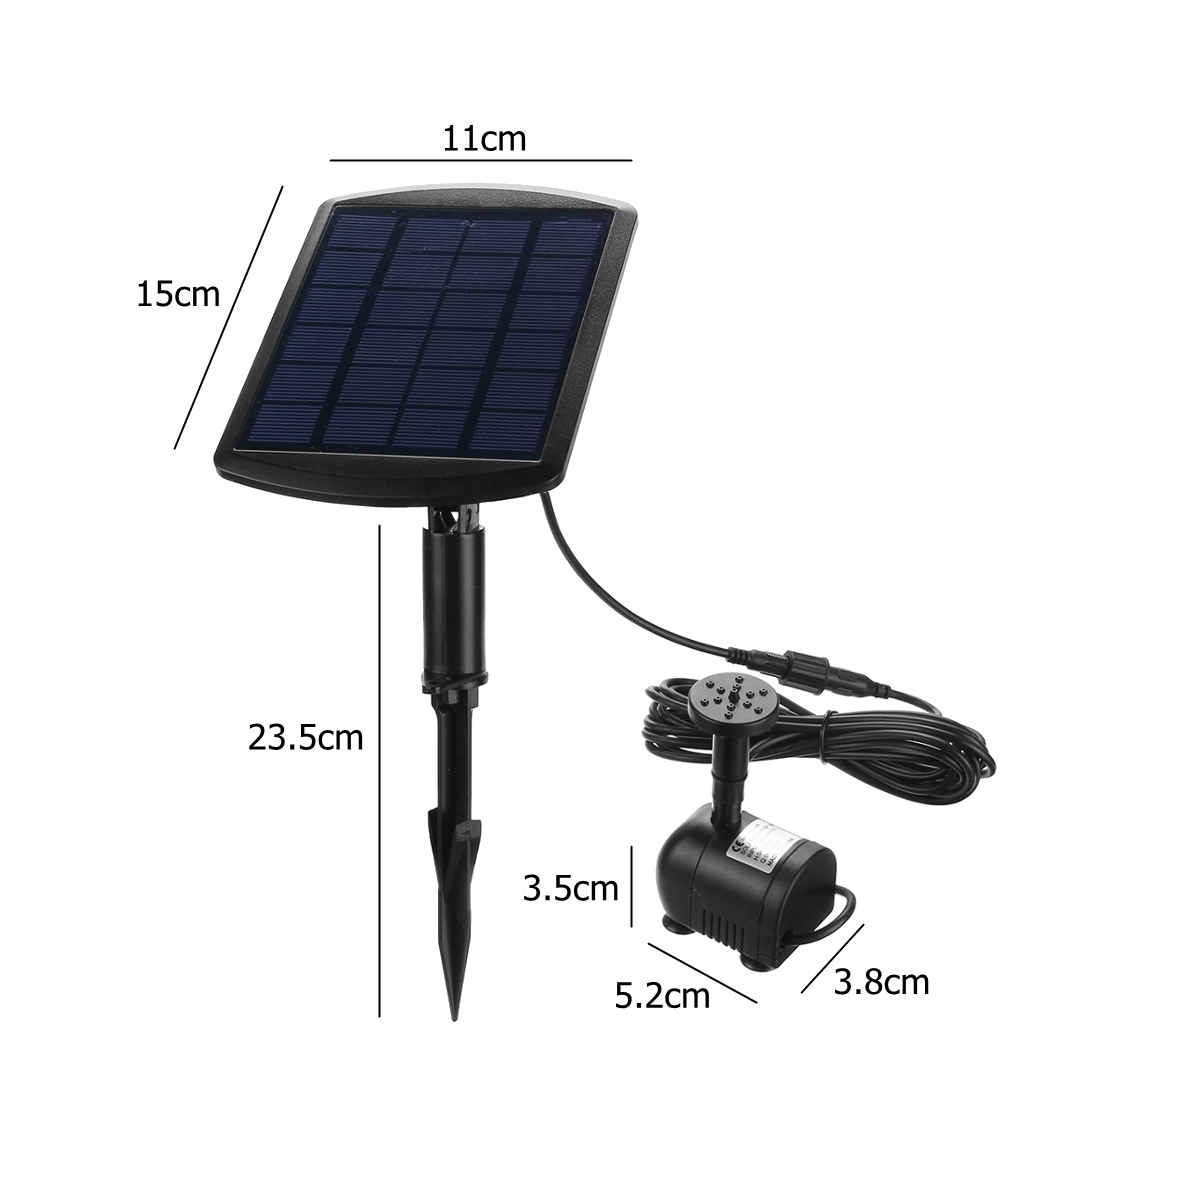 6V-18W-Solar-Panel-Powered-Water-Fountain-Pump-For-Pool-Pond-Garden-Outdoor-Submersible-1473018-10